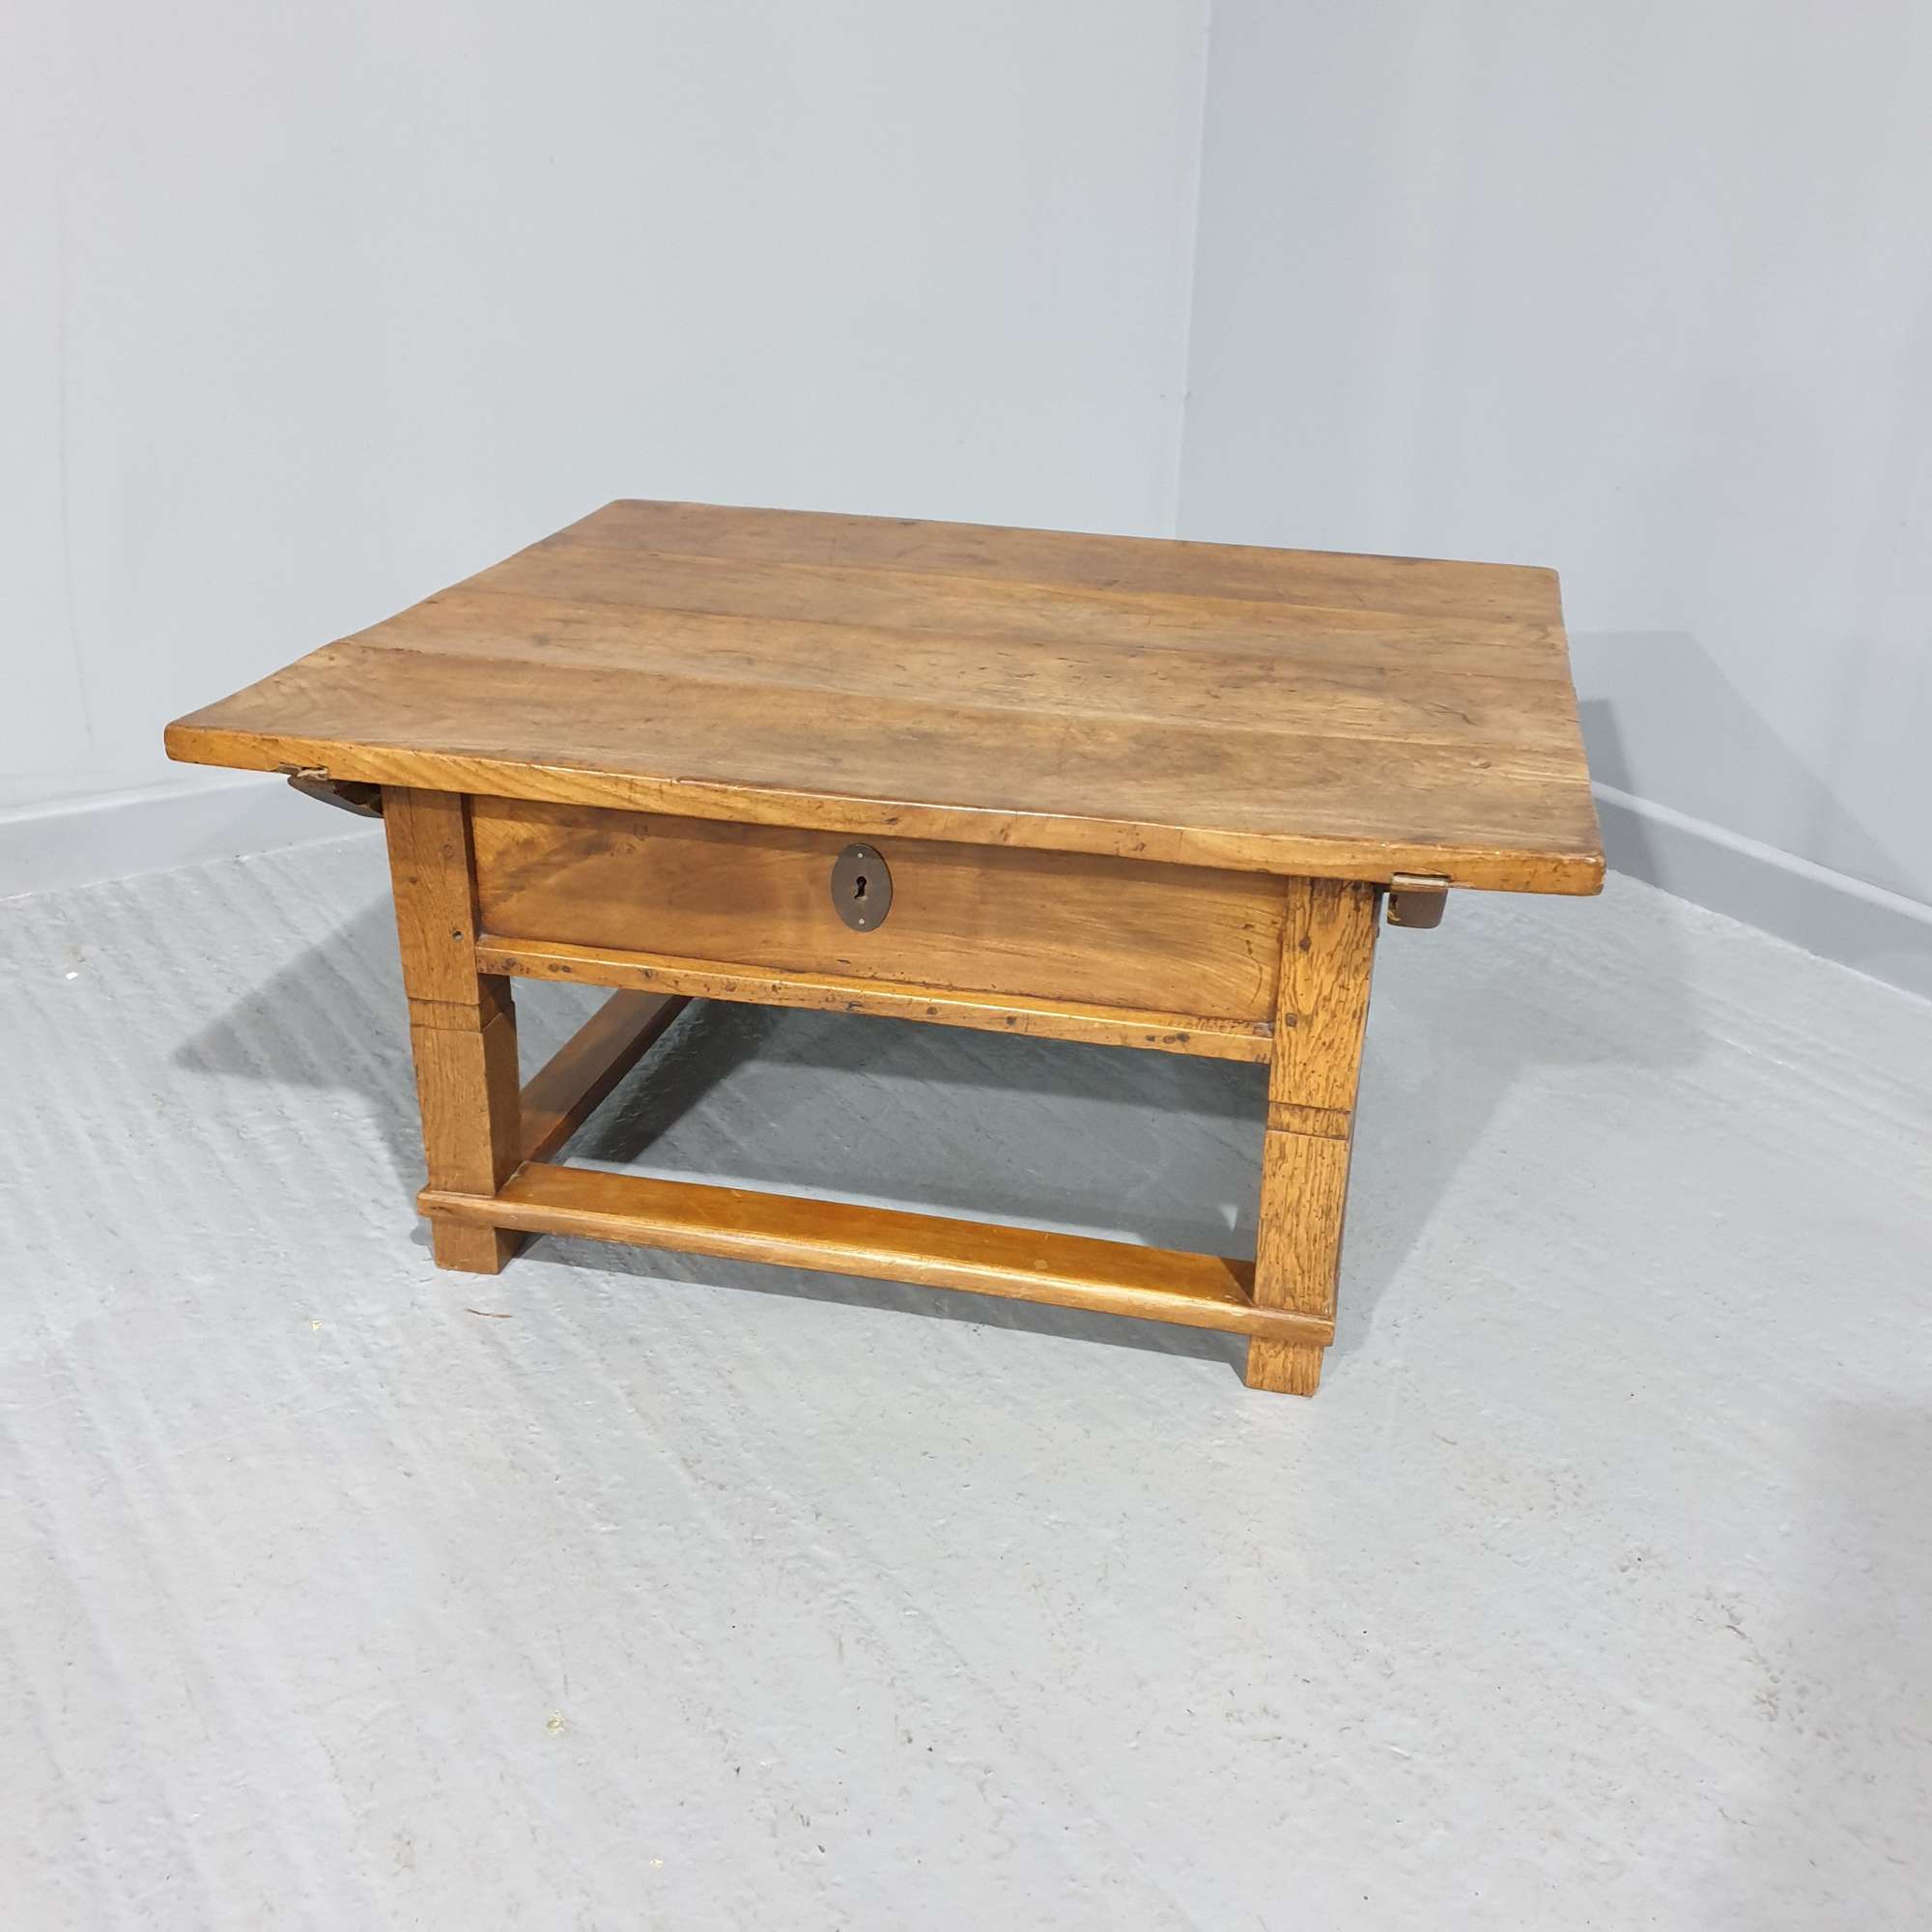 Super Chestnut Coffee Table